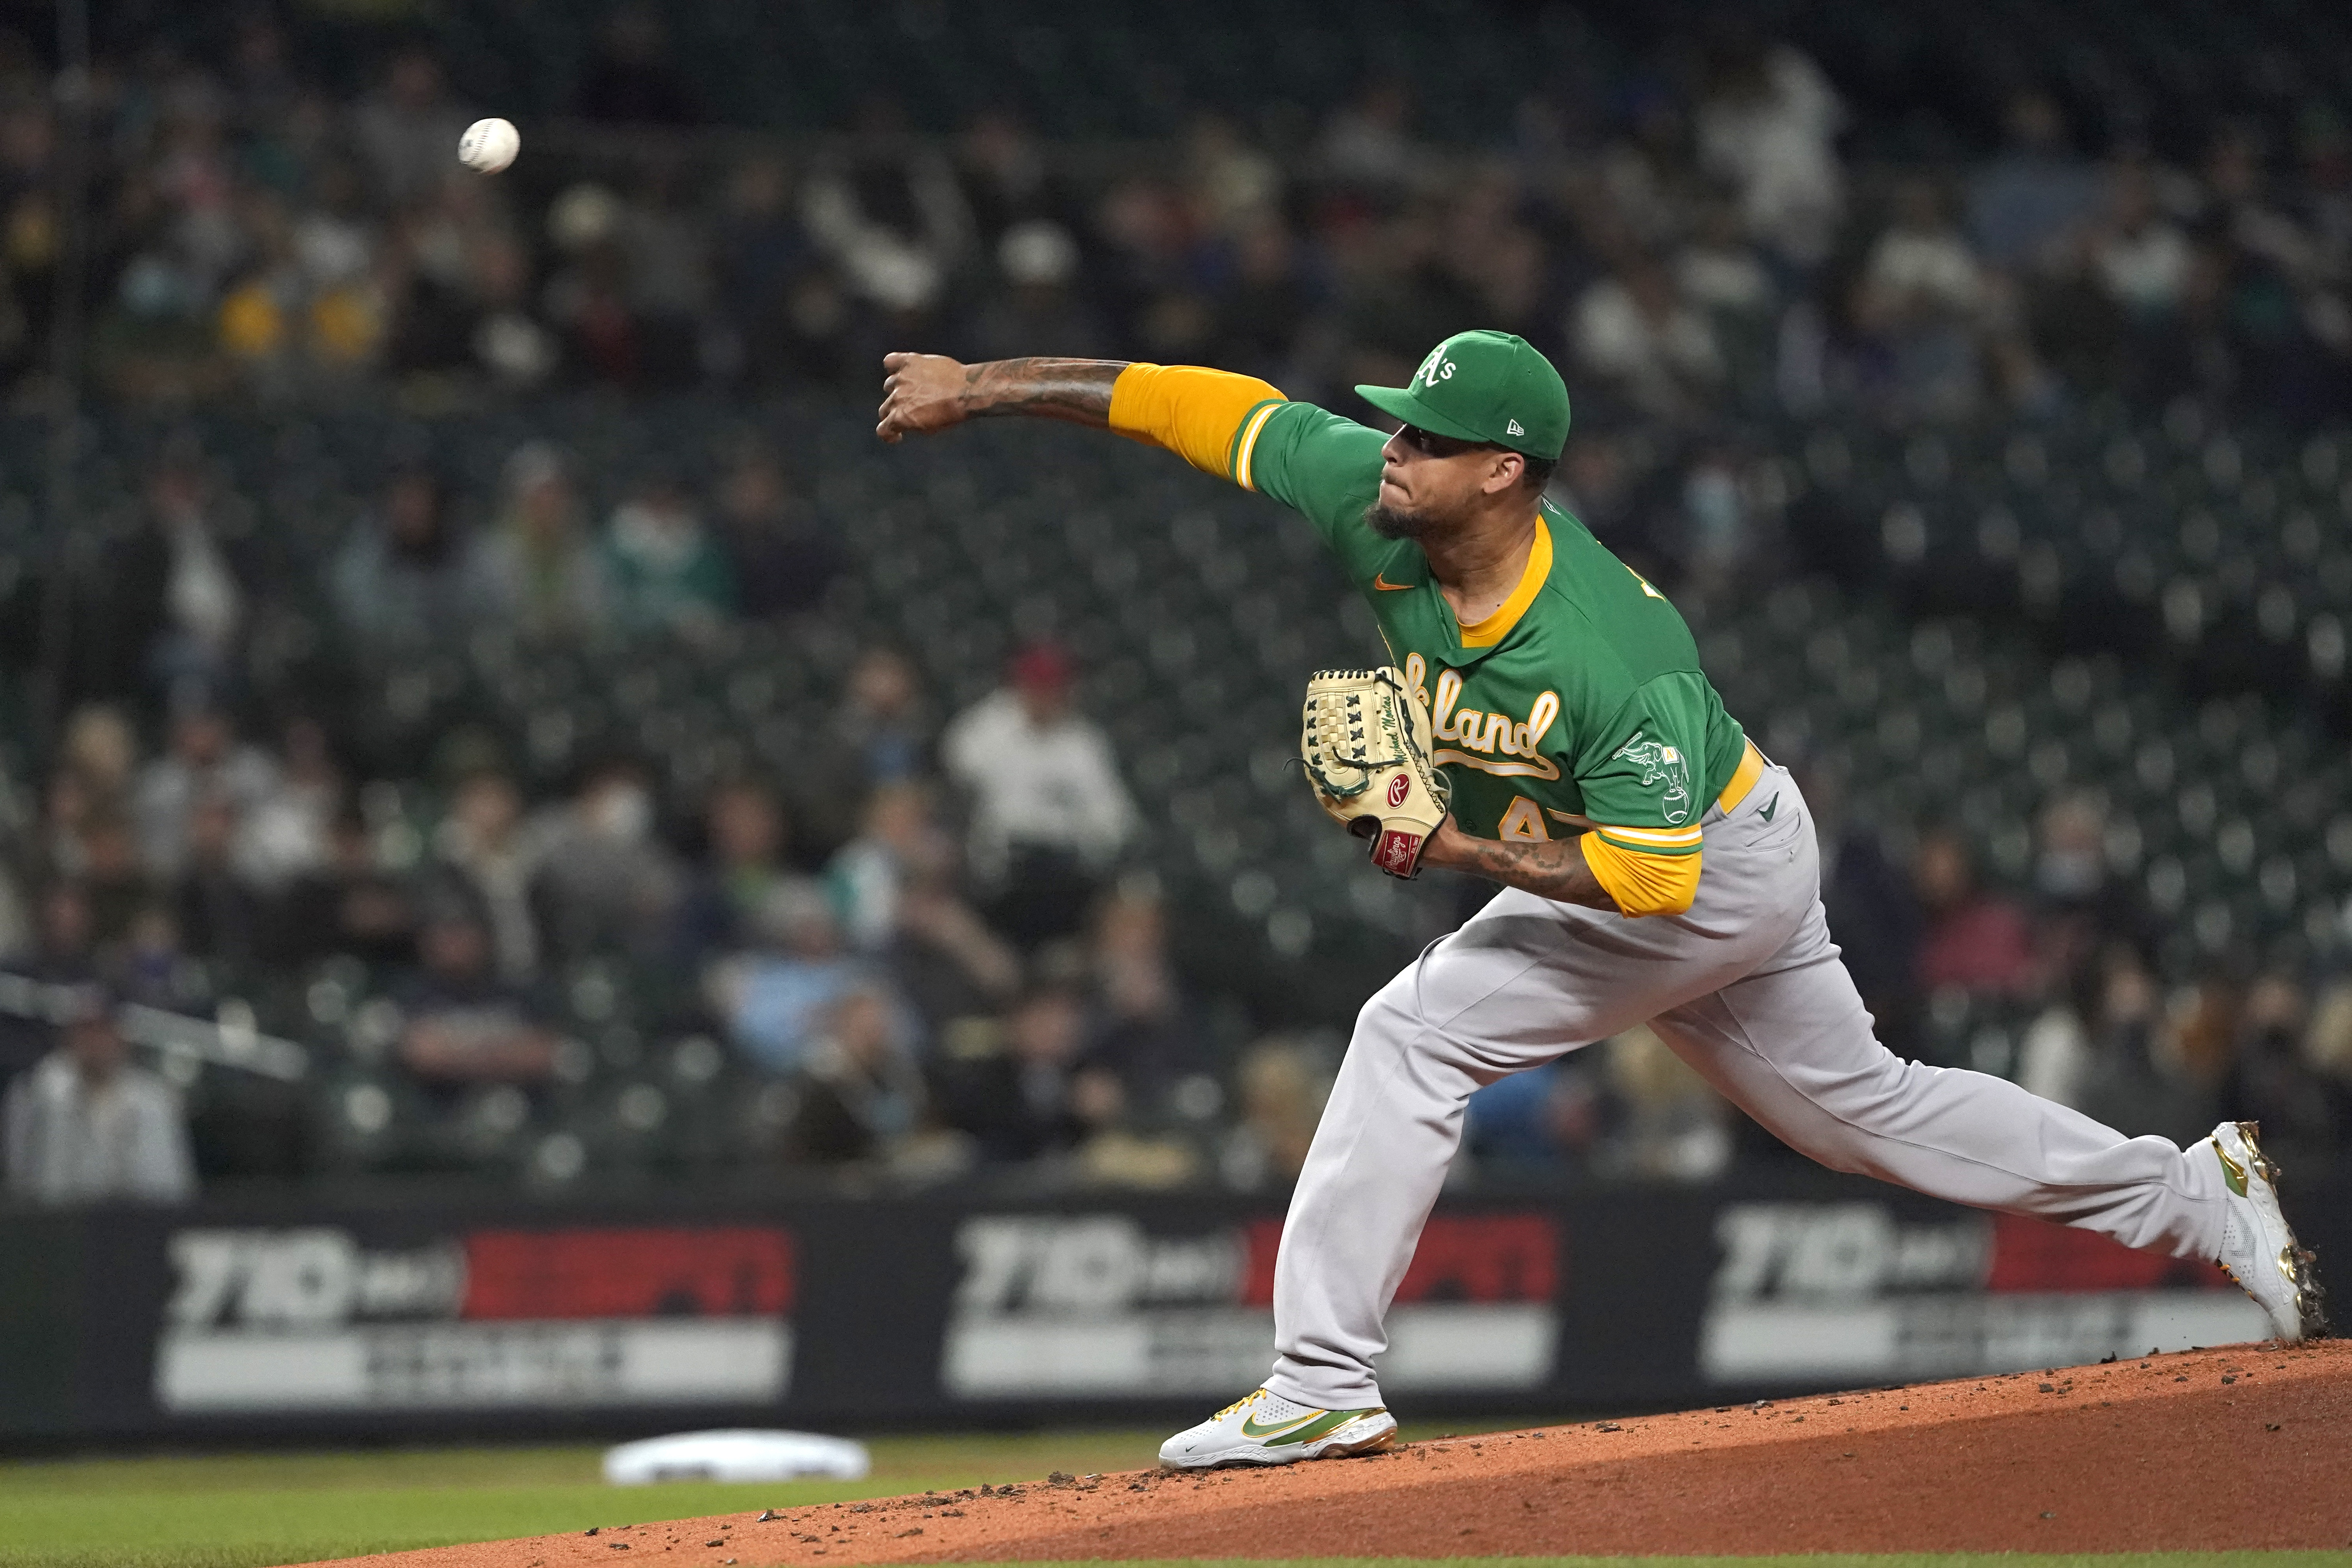 A's Frankie Montas strikes out 10 in near-complete game vs. Tigers